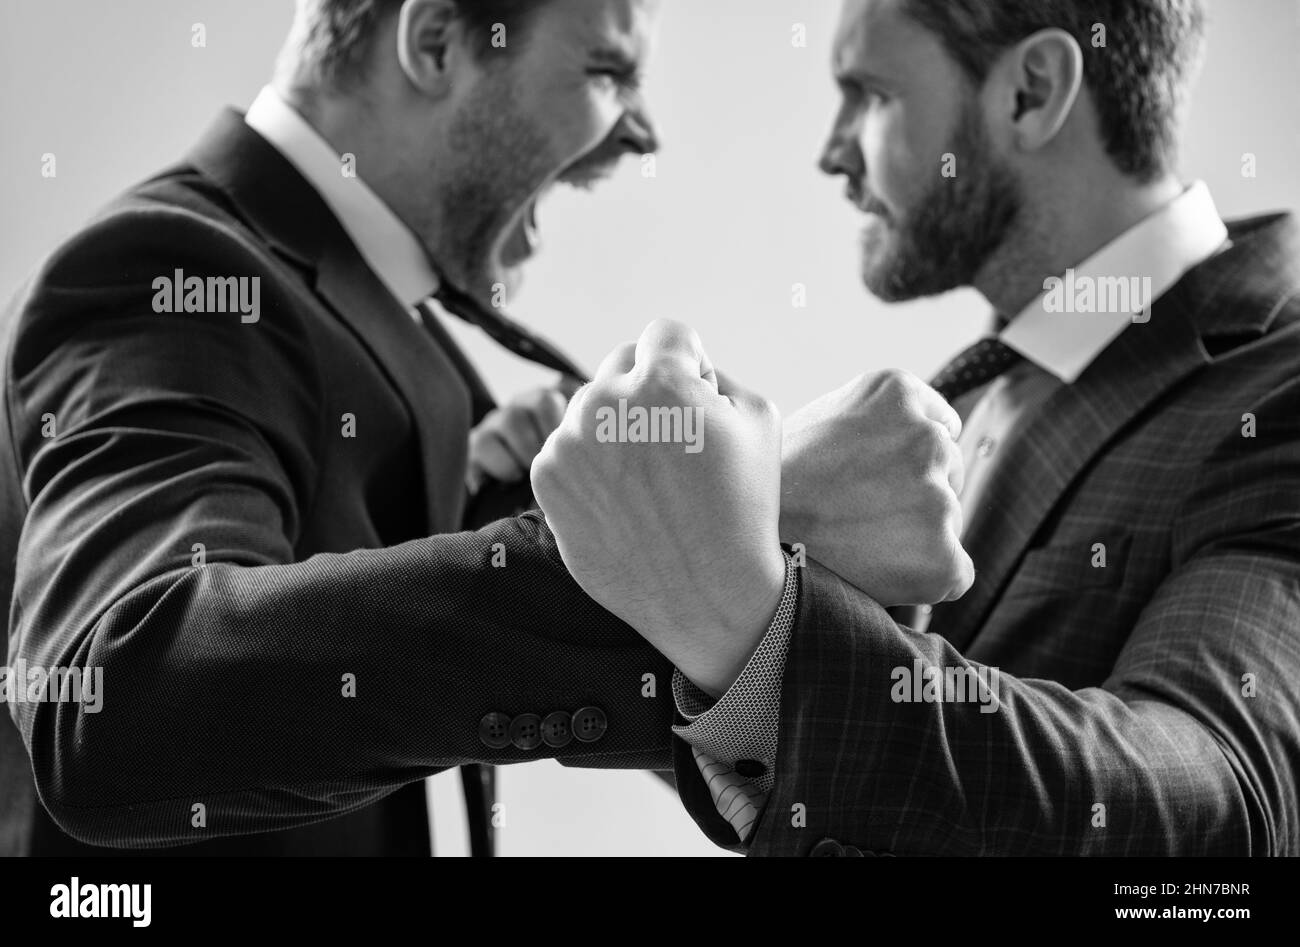 fist of punching disagreed men business partners or colleague disputing, selective focus, corporate battle. Stock Photo